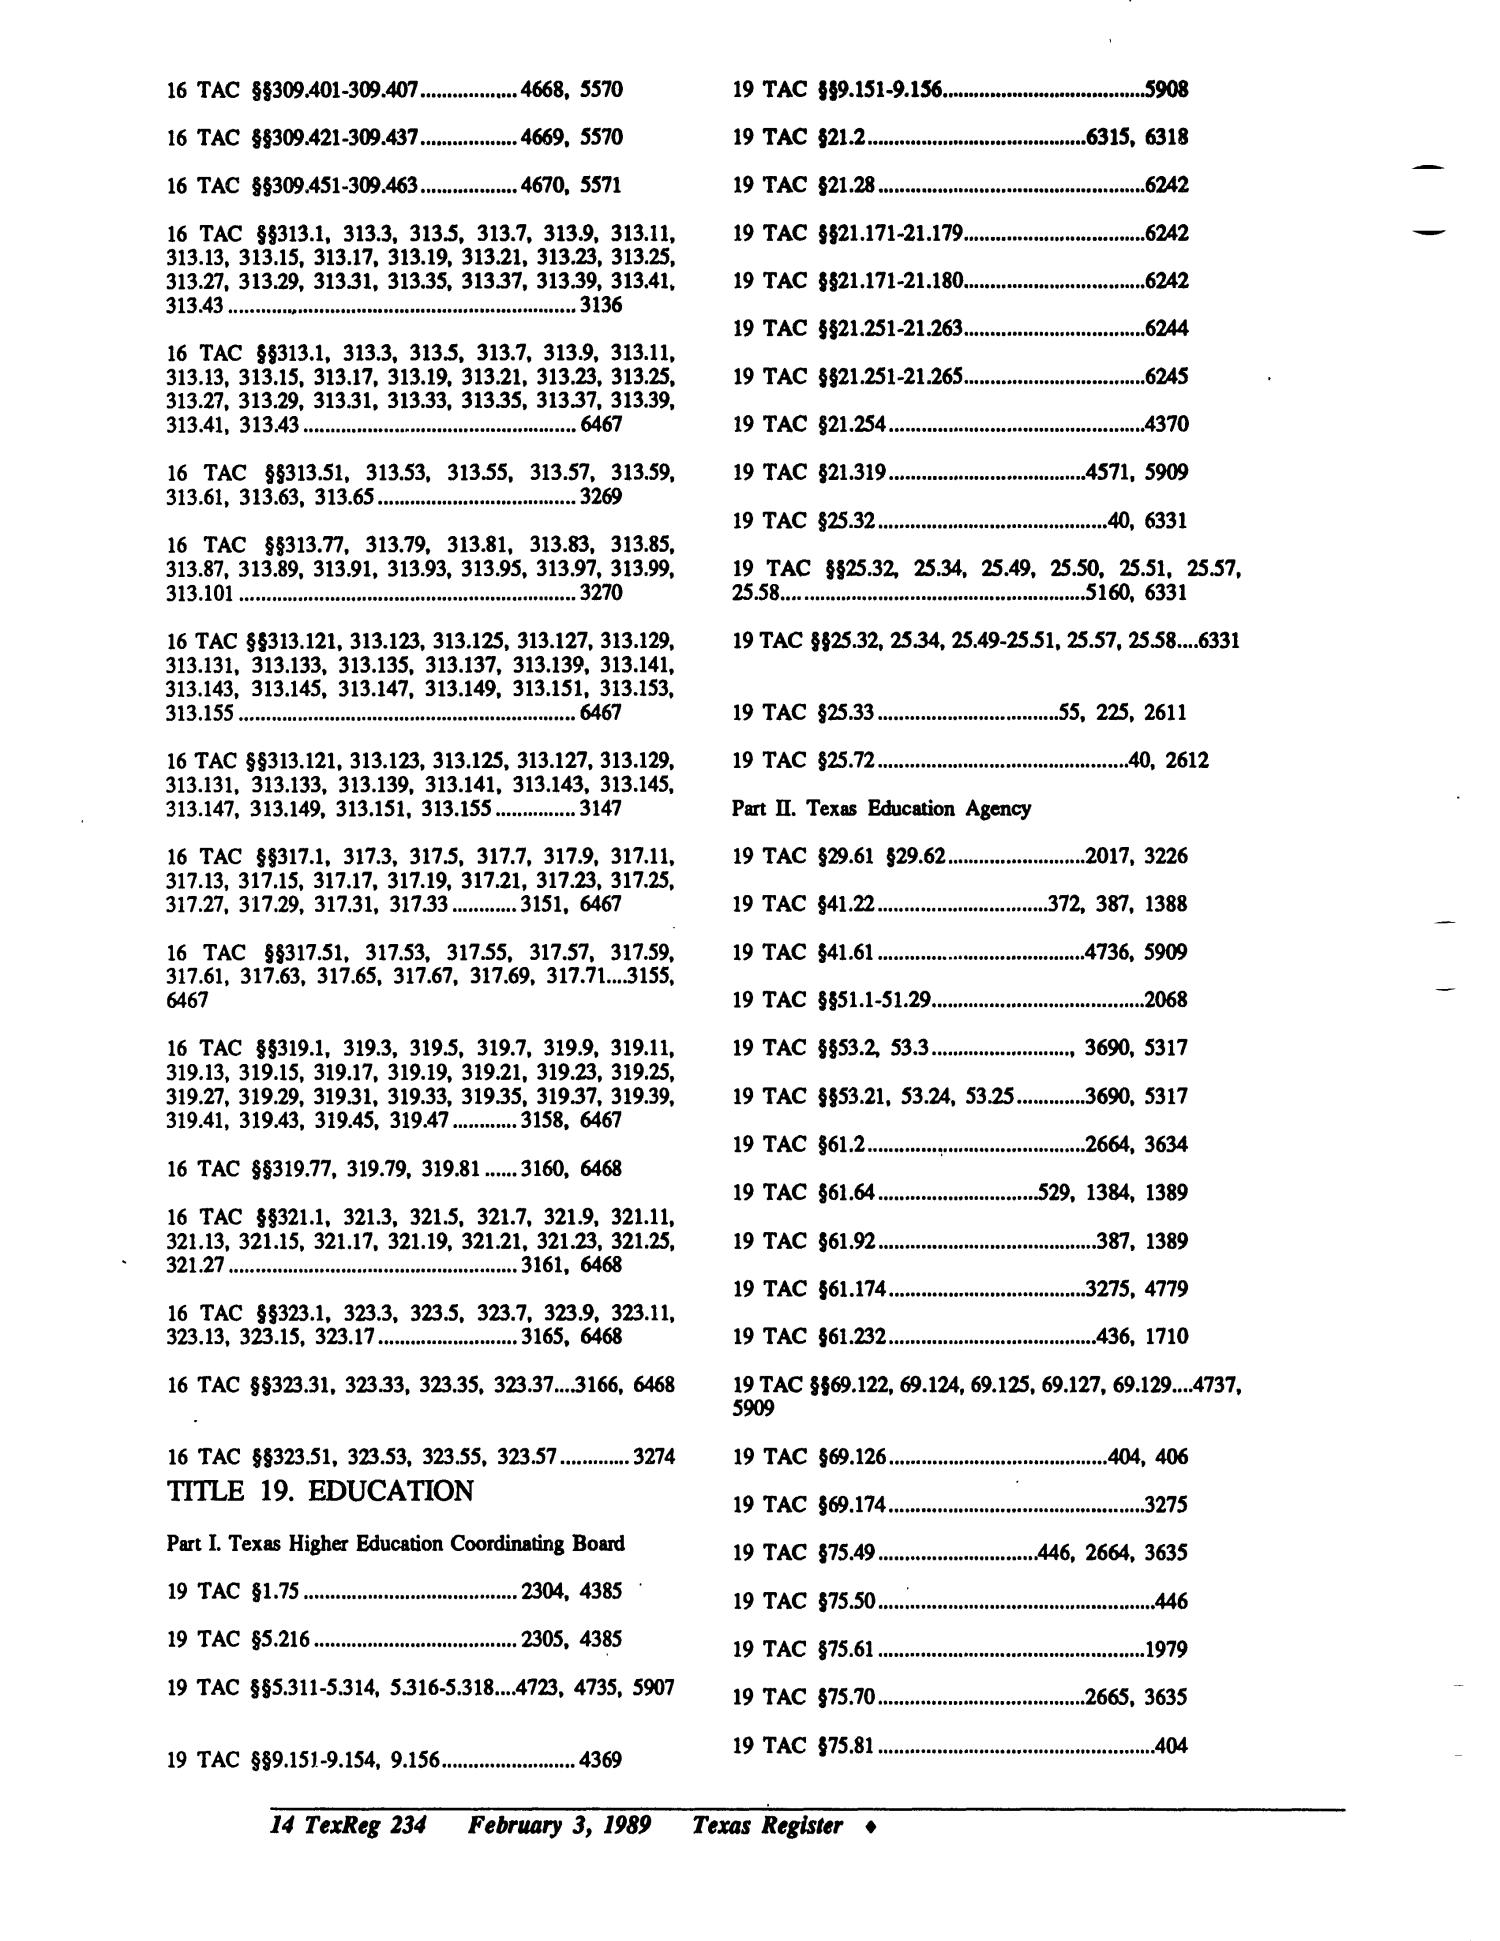 Texas Register: Annual Index January - December 1988, Volume 13 Numbers [1-96] - pages 225-350, February 3, 1989
                                                
                                                    234
                                                